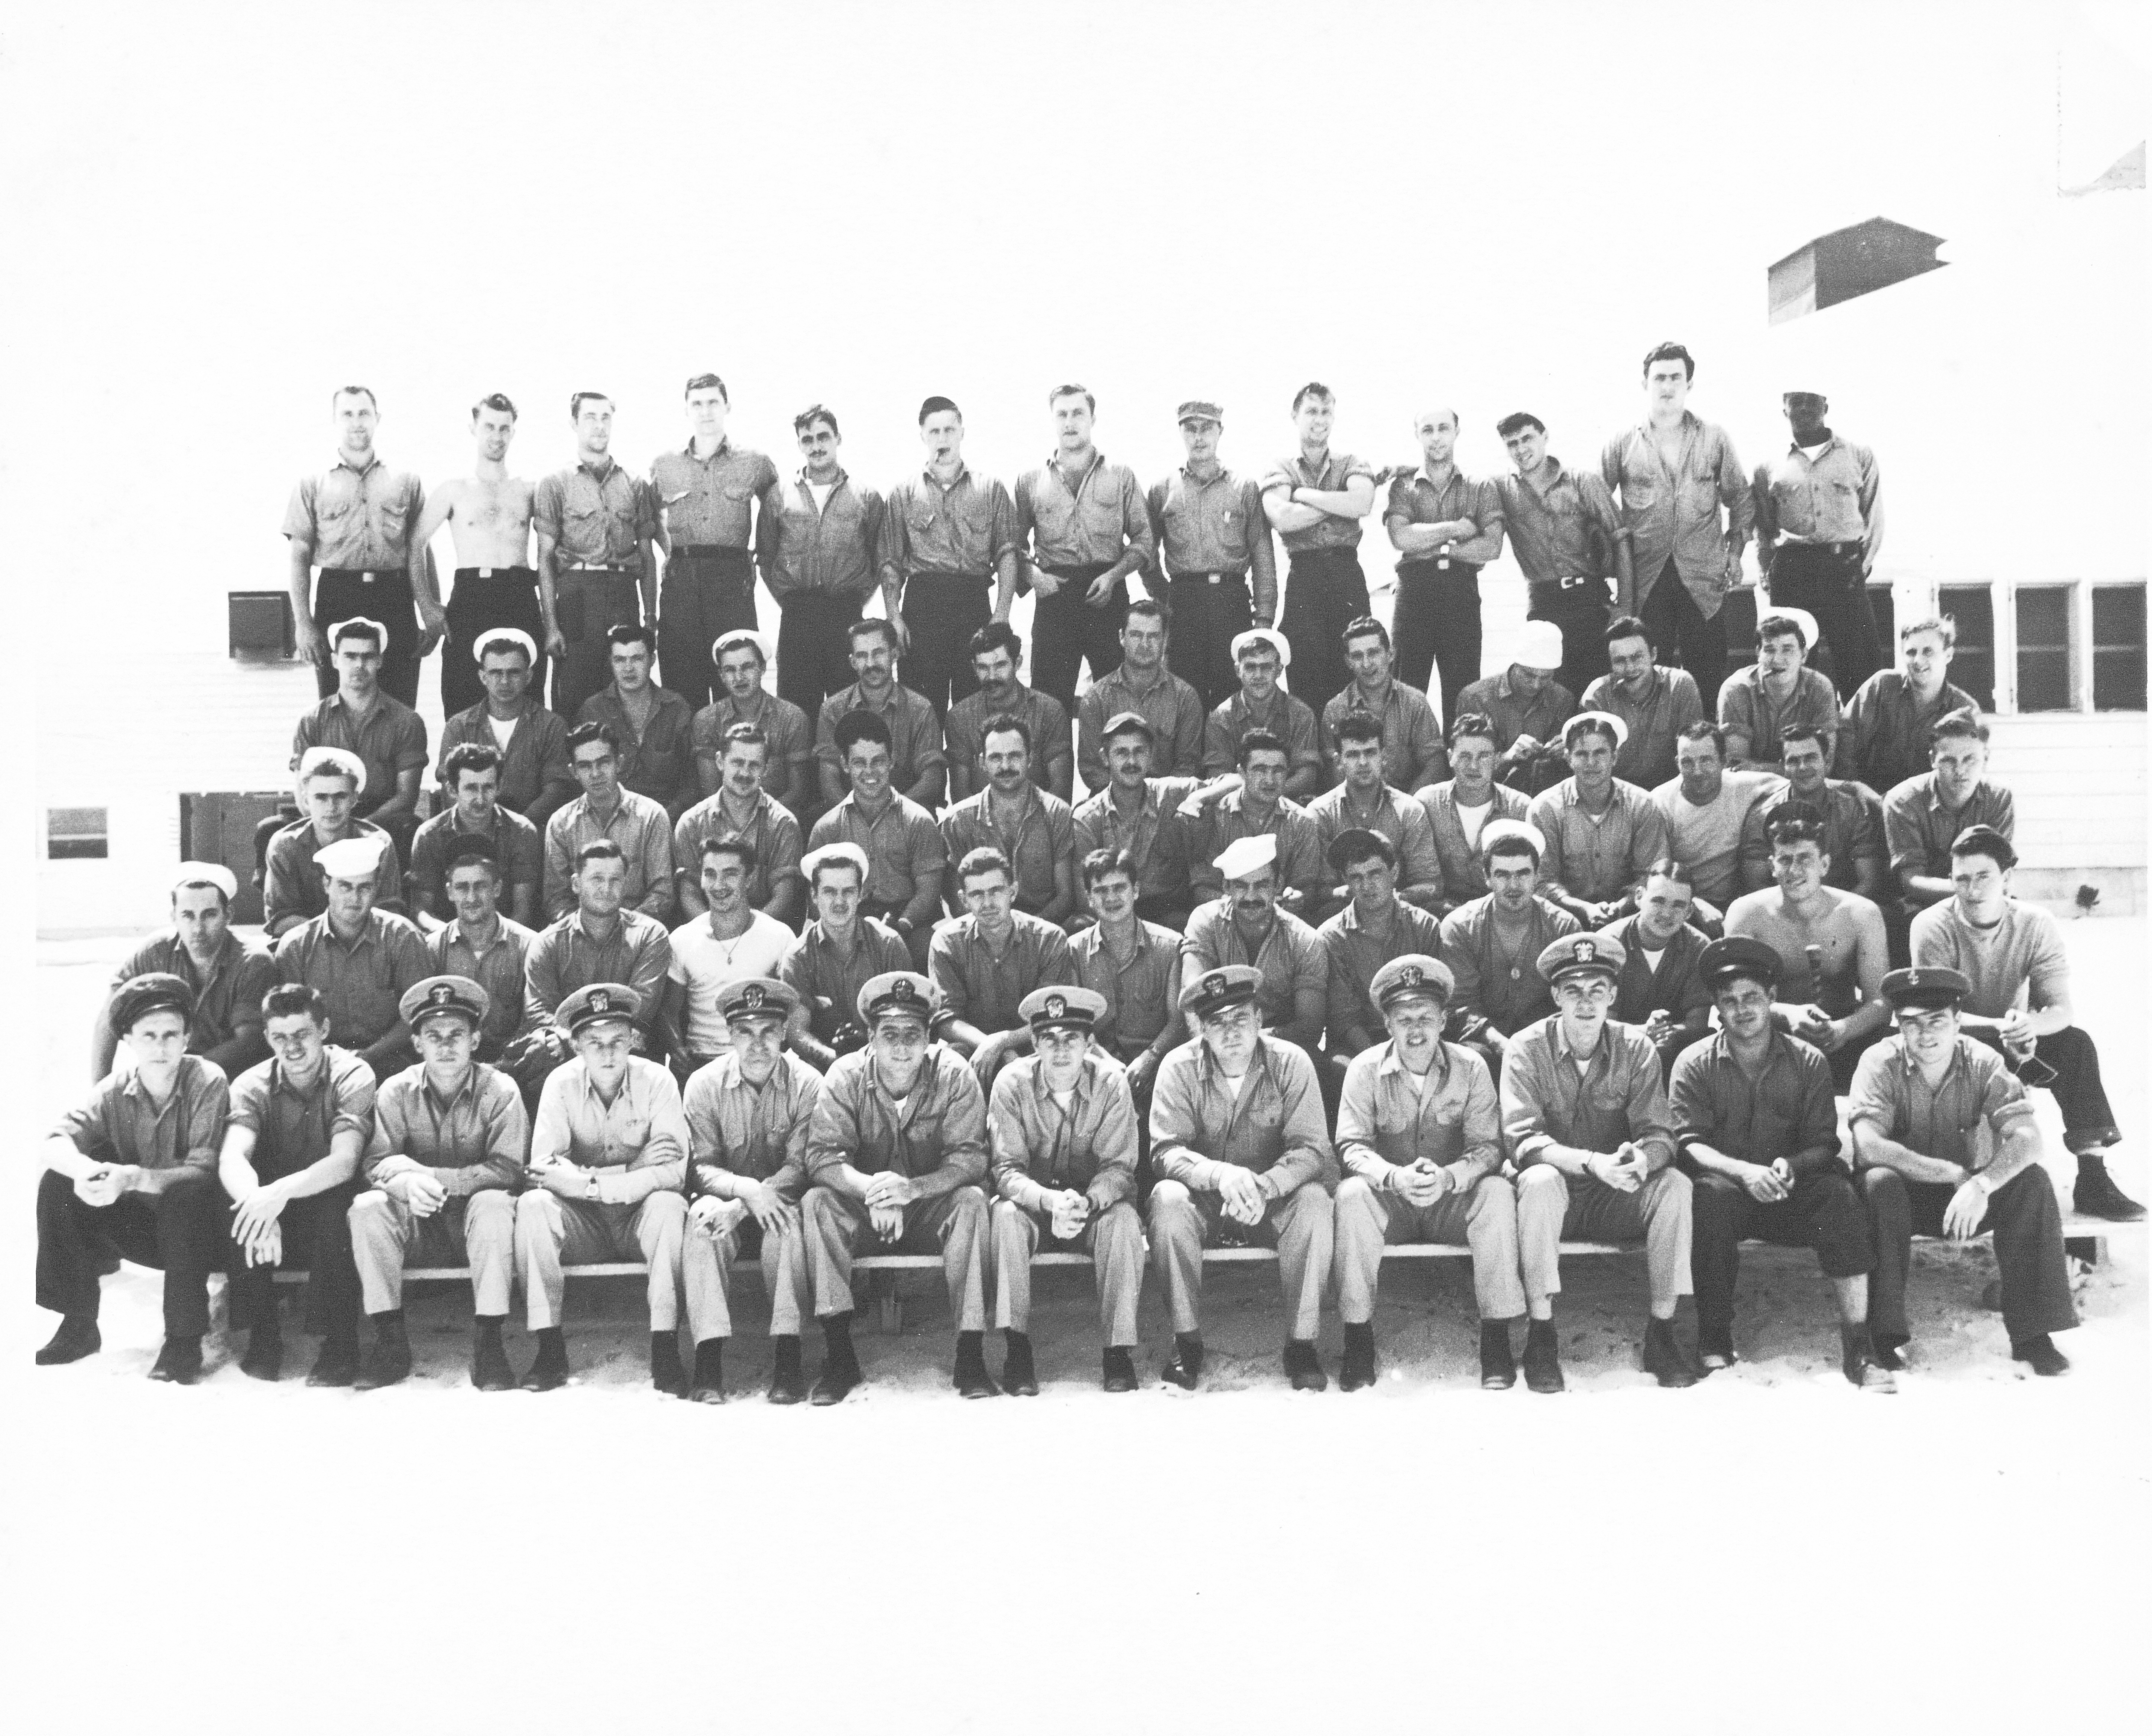 Officers and men of USS Cabrilla, date unknown